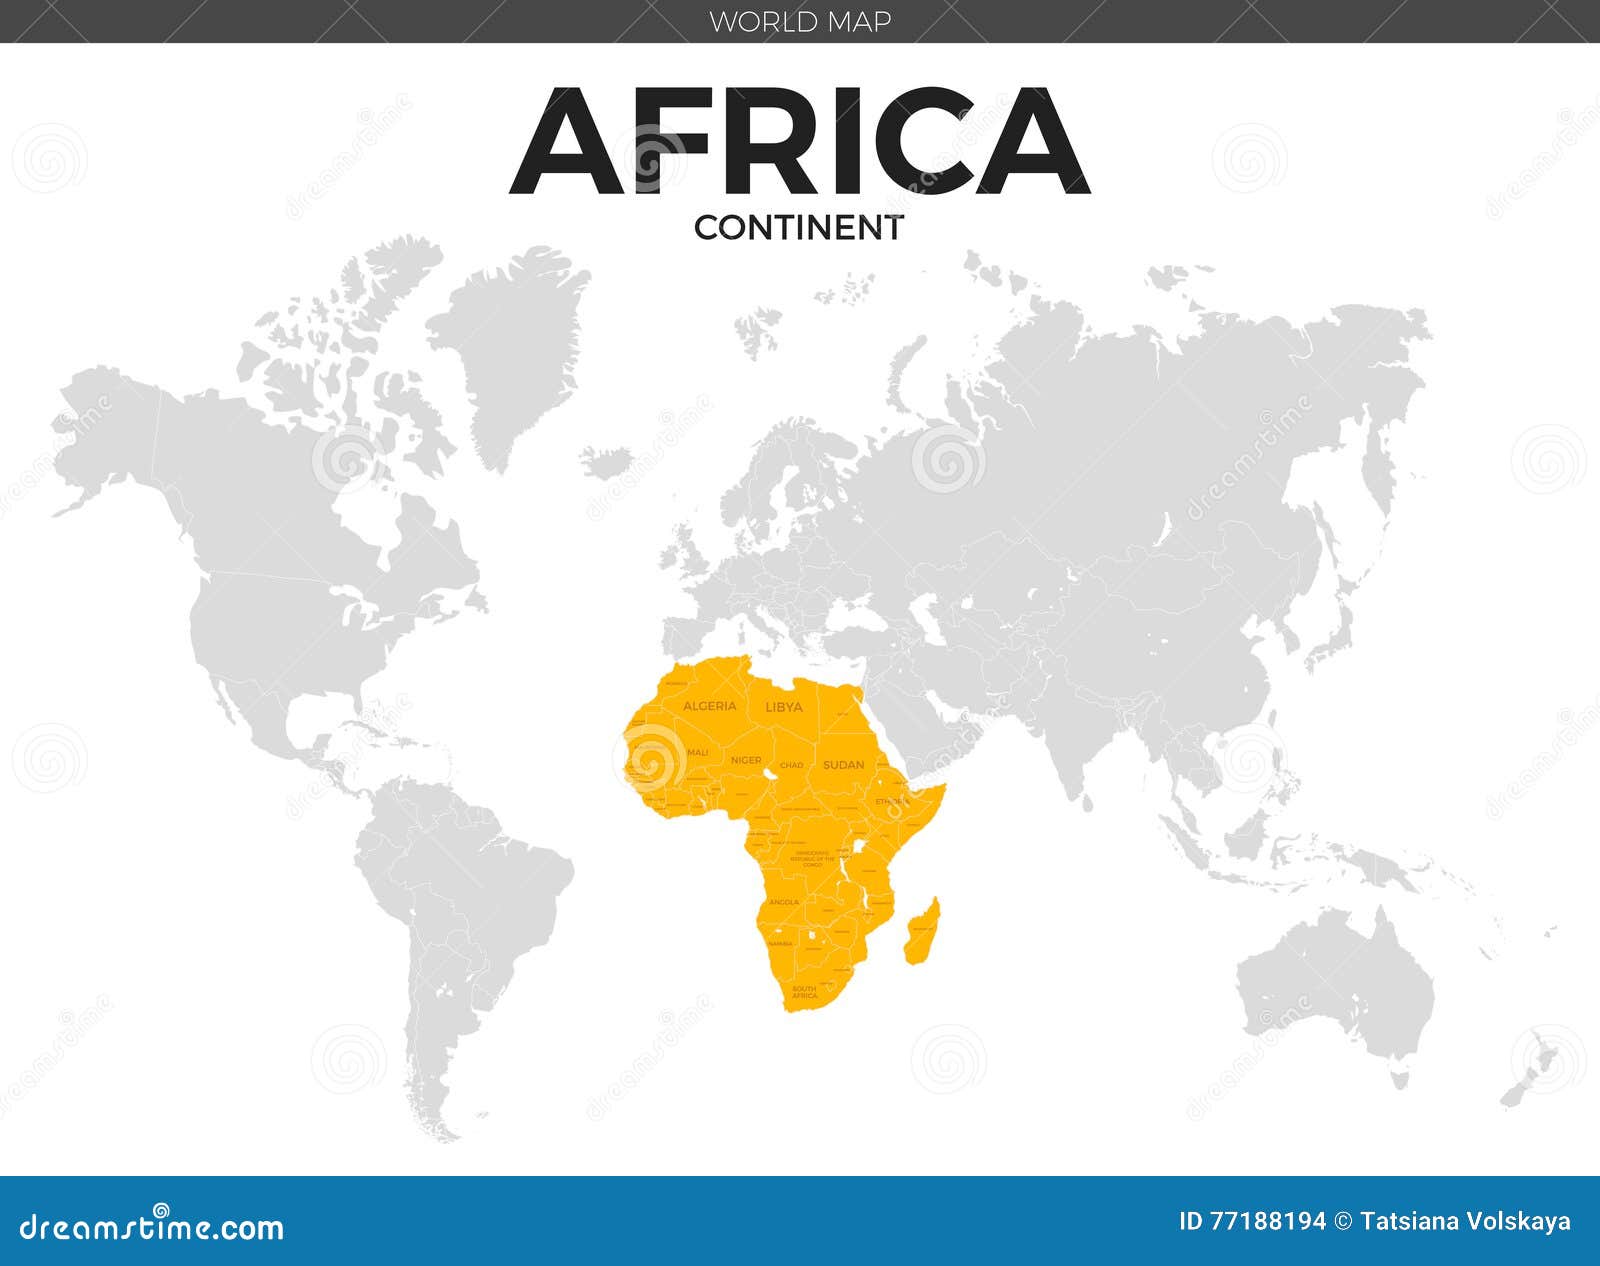 africa continent location map